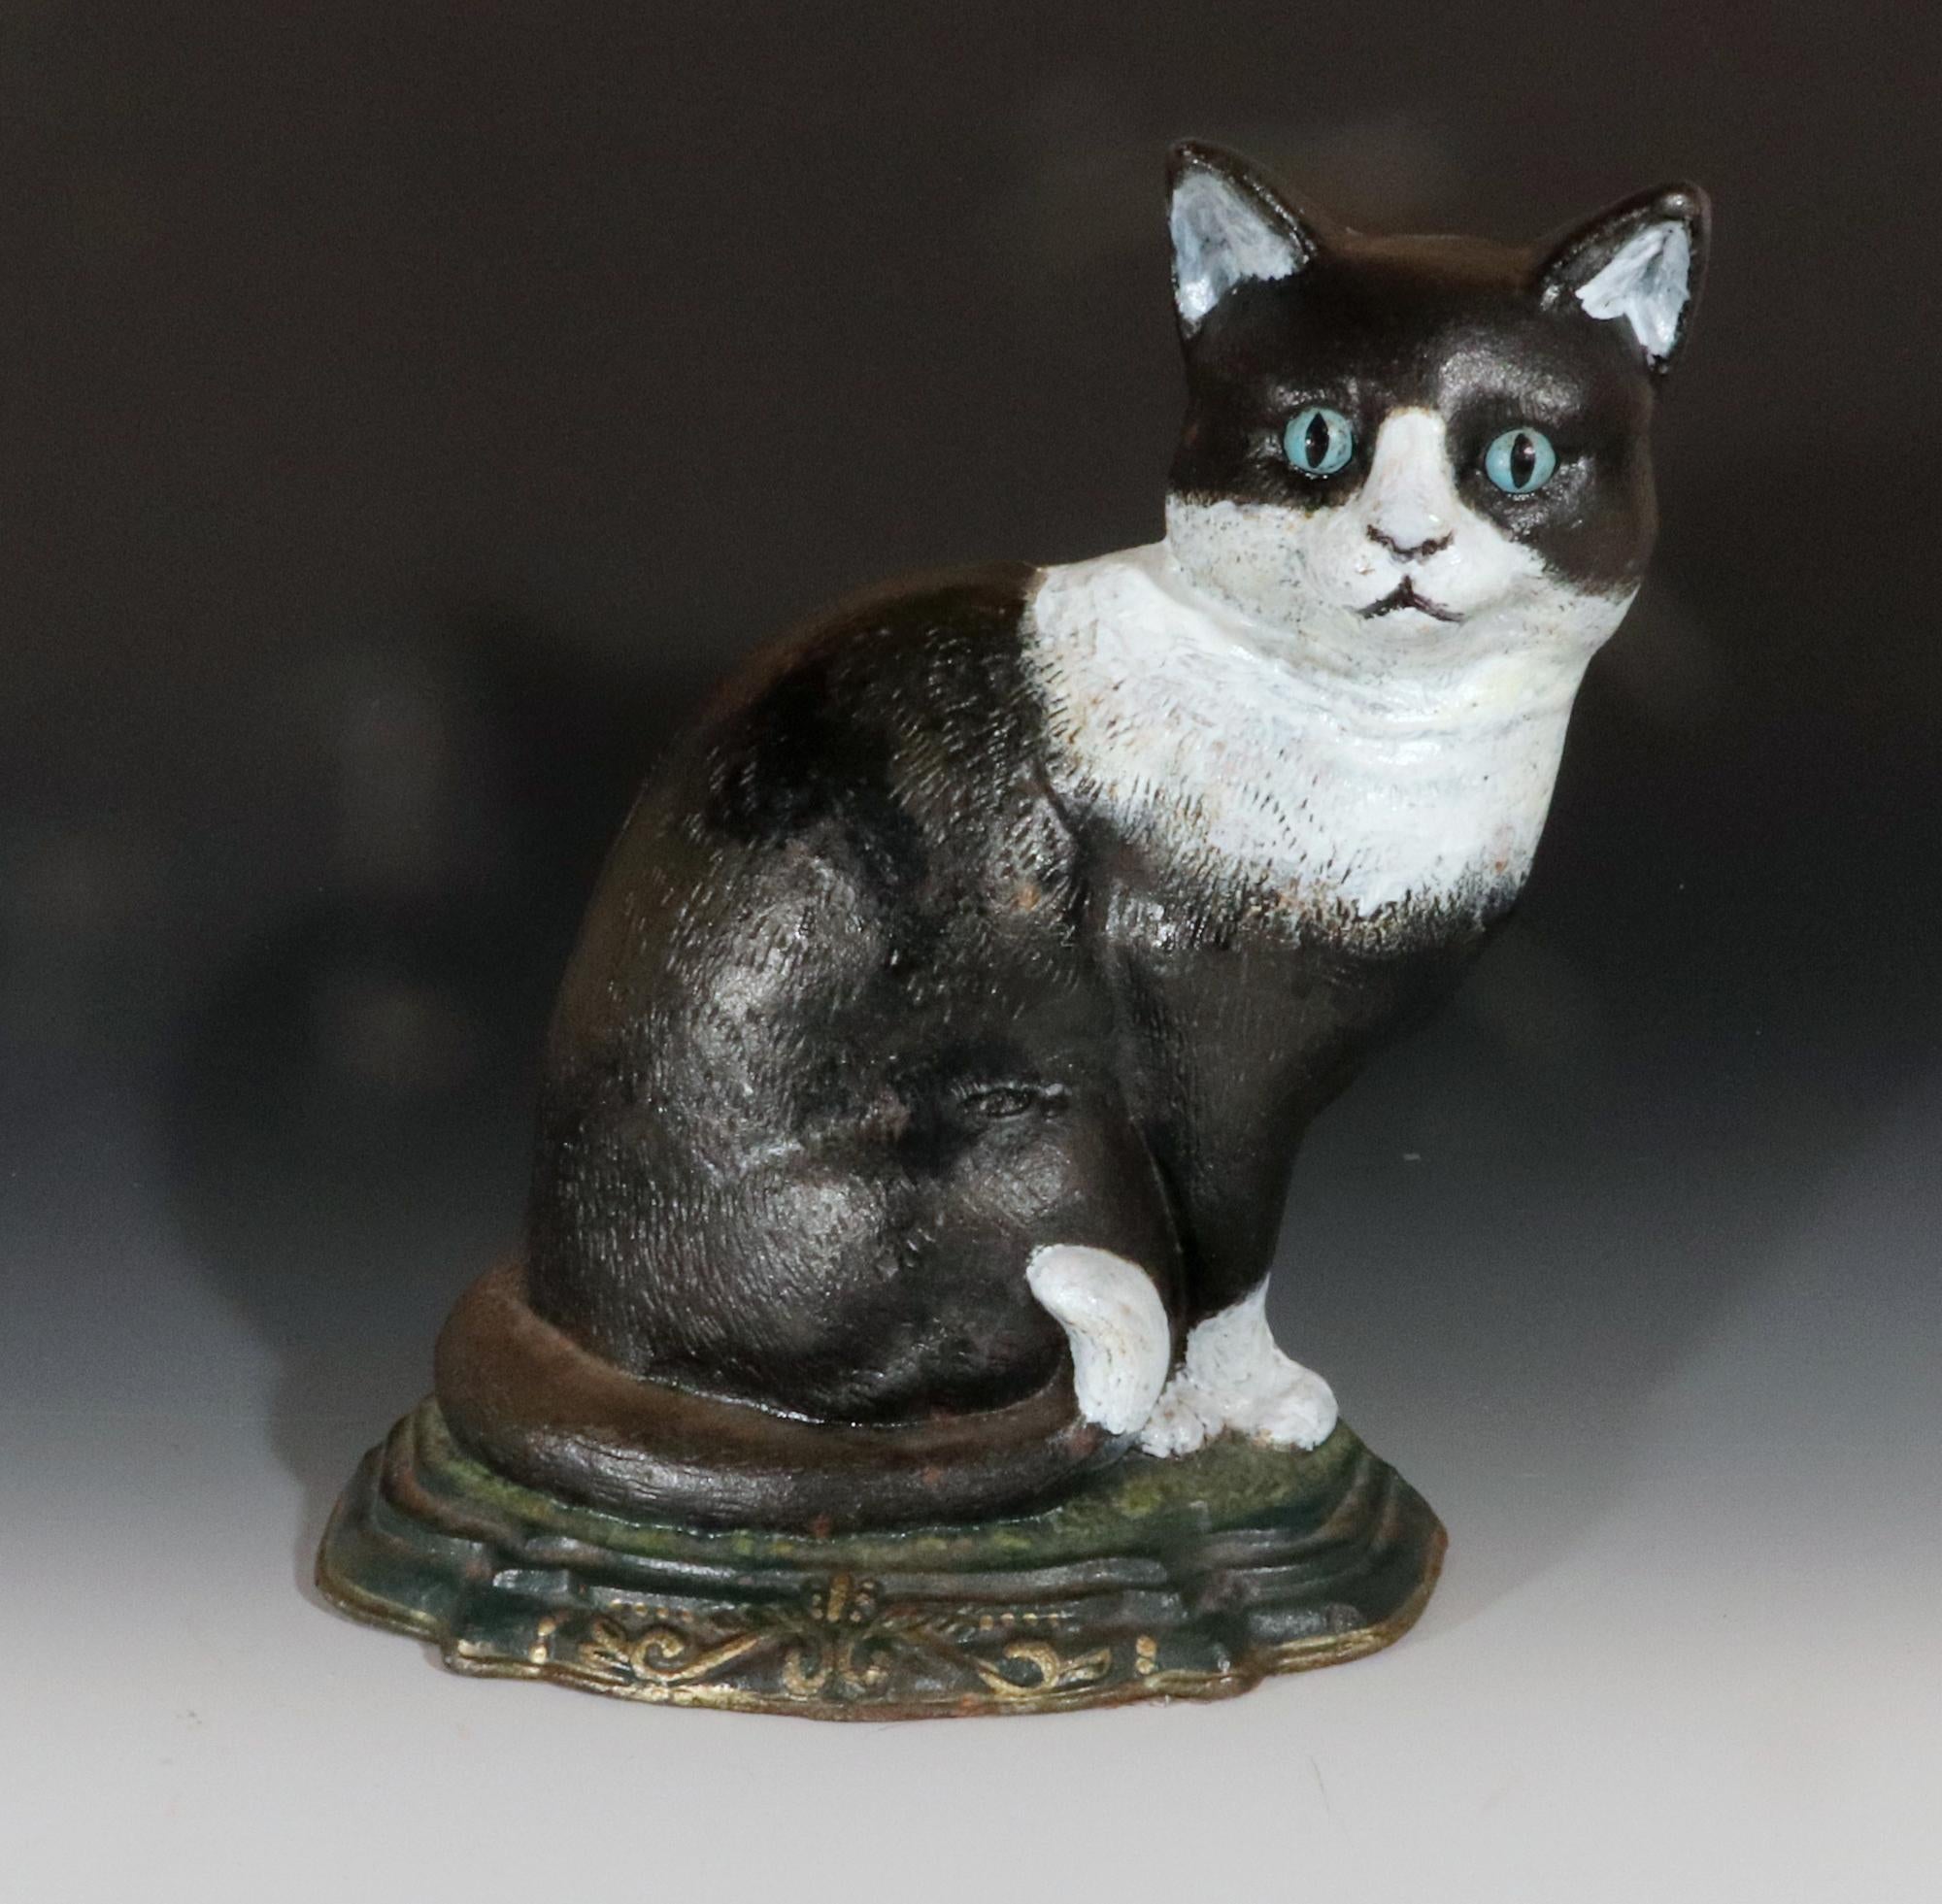 American Folk Art Door Stop in the form of a Sitting Cat,
Early 20th Century

This charming doorstop, crafted in the early 20th century, embodies the spirit of American Folk Art.  Depicting a black and white cat seated, the piece exudes a sense of